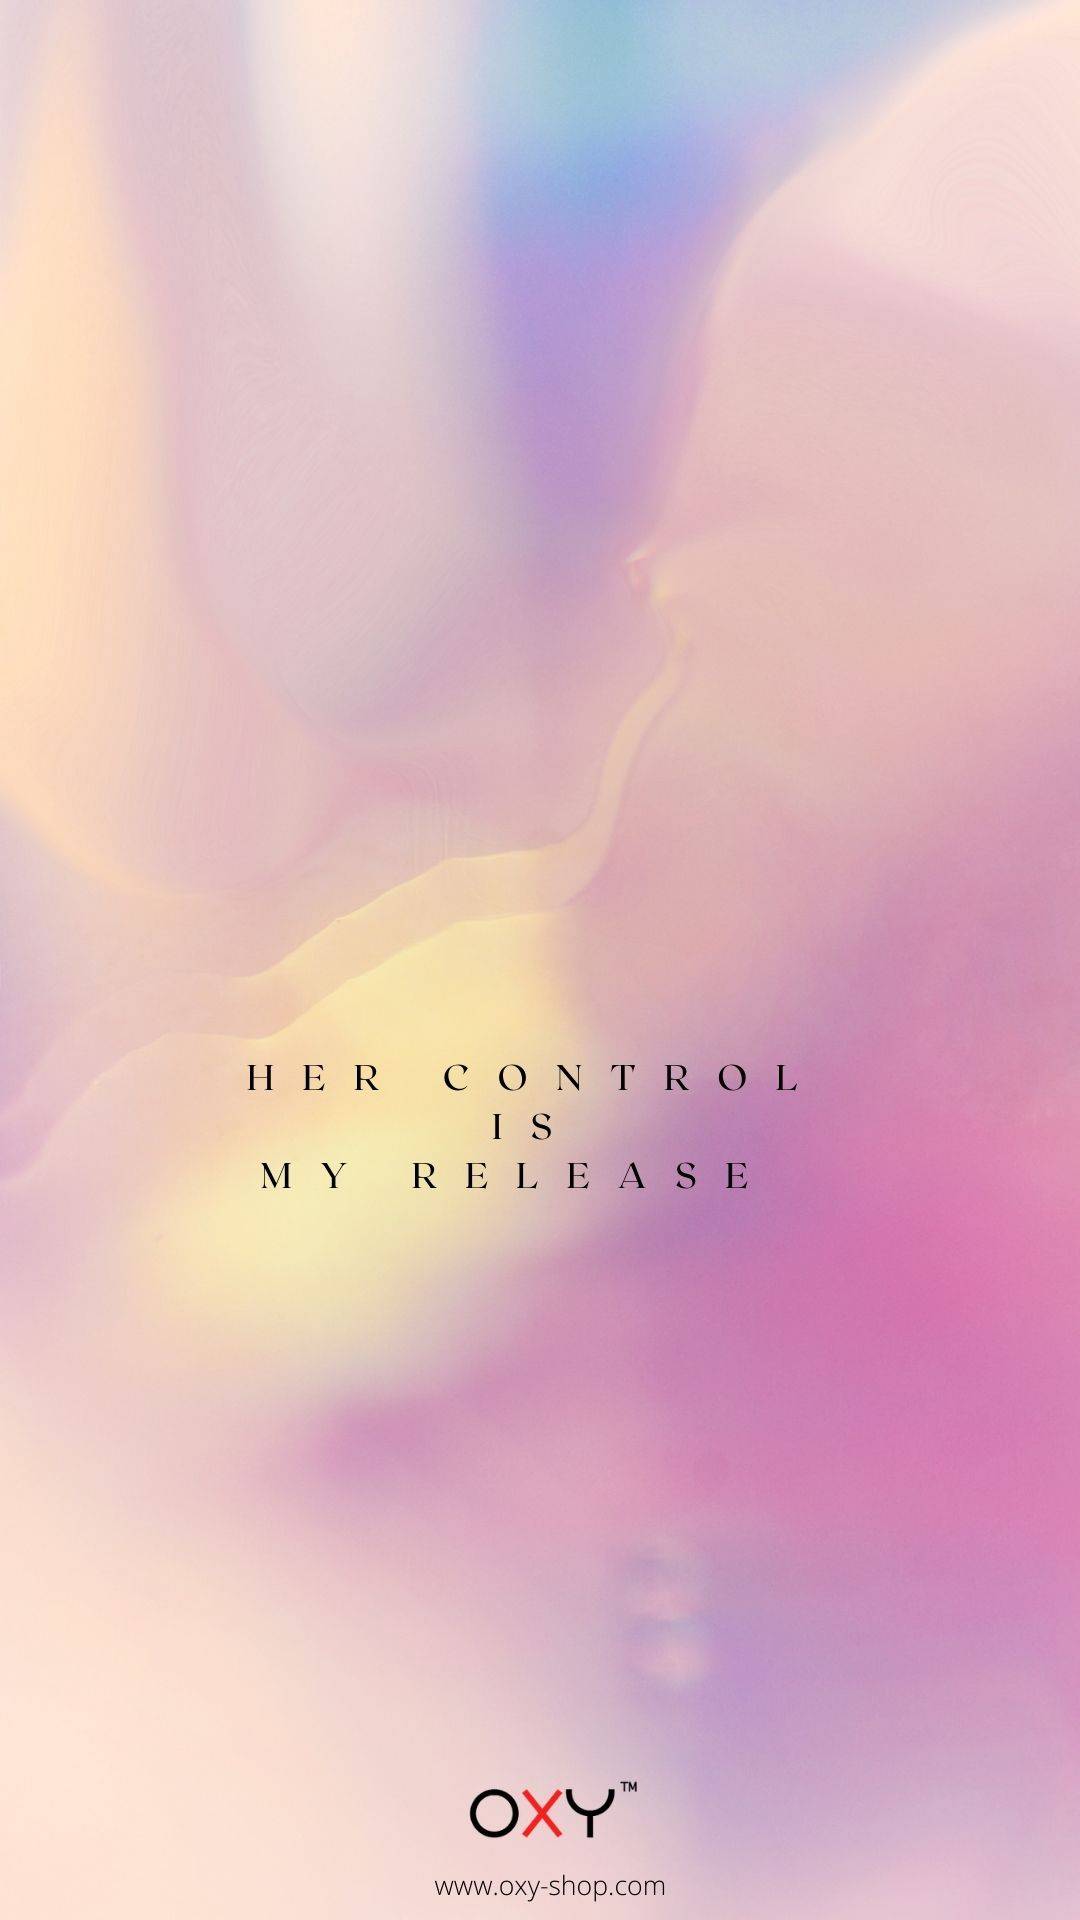 Her control is my release. - BDSM wallpaper